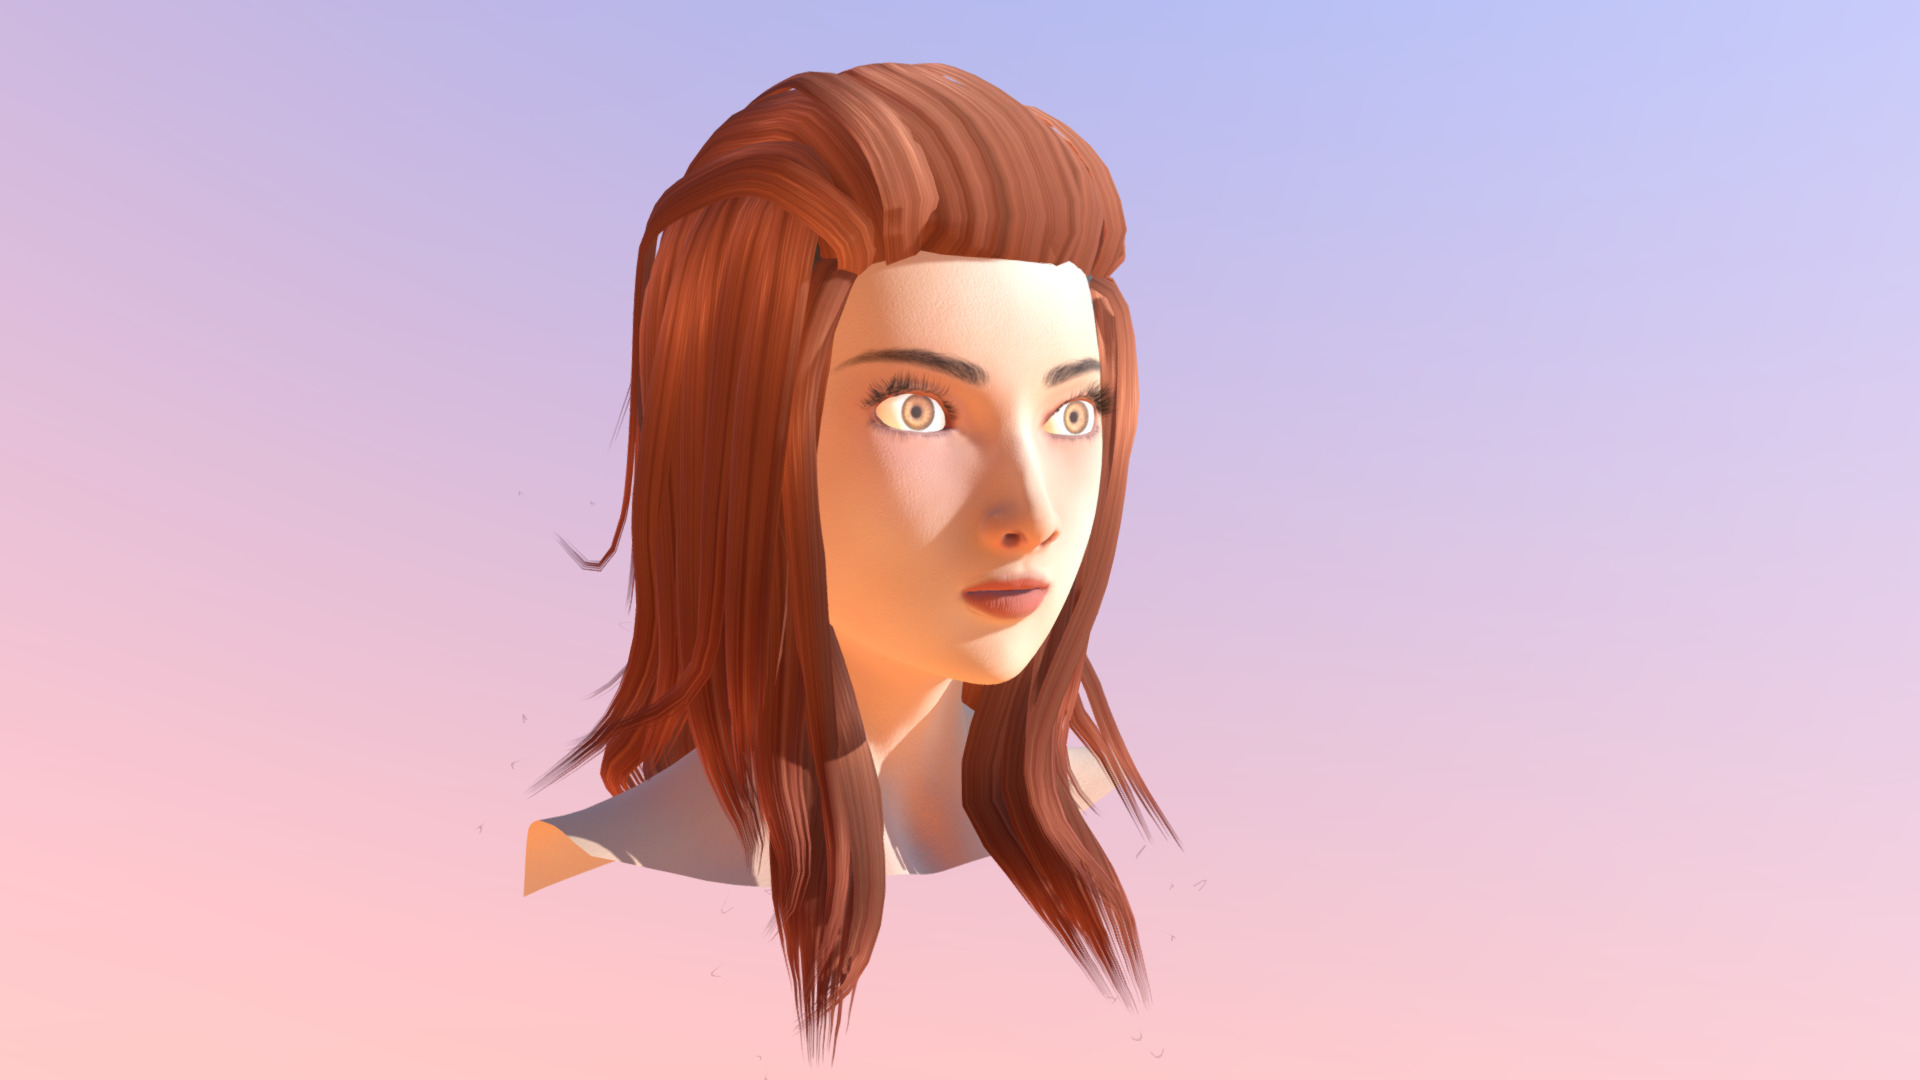 3D model Pocolov Hair 02 - This is a 3D model of the Pocolov Hair 02. The 3D model is about a person with long hair.